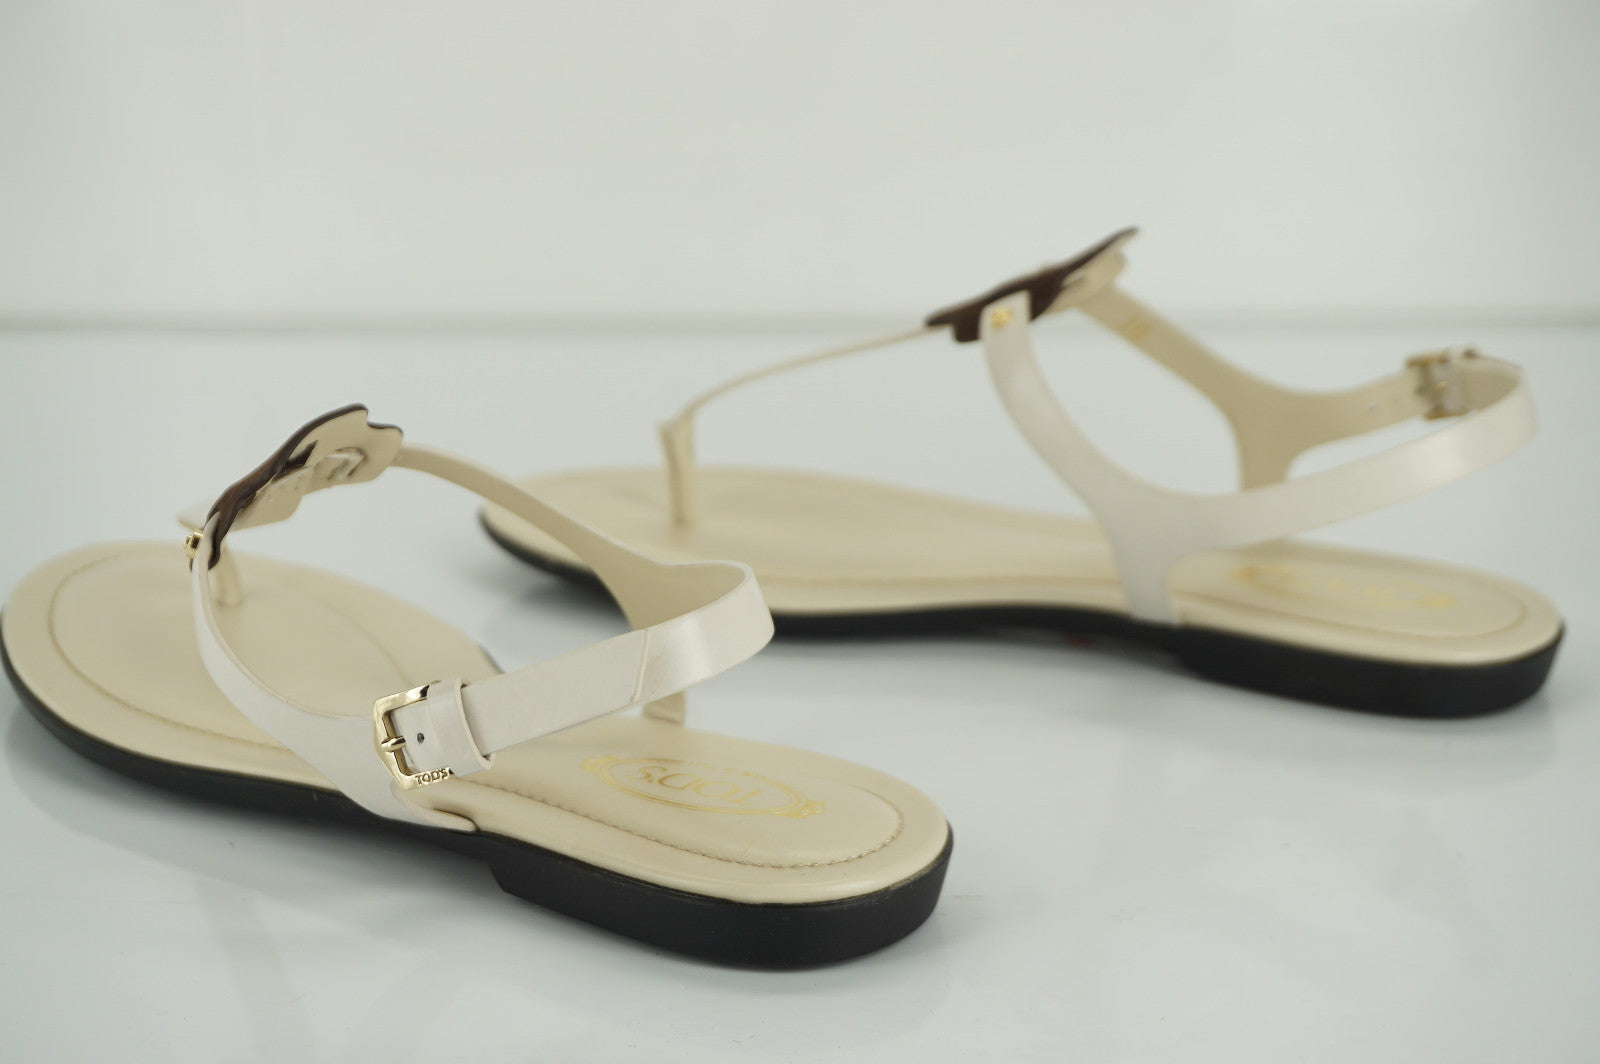 Tods Gomma T Strap Leather Thong Sandals size 36 Ankle Strap NIB $465